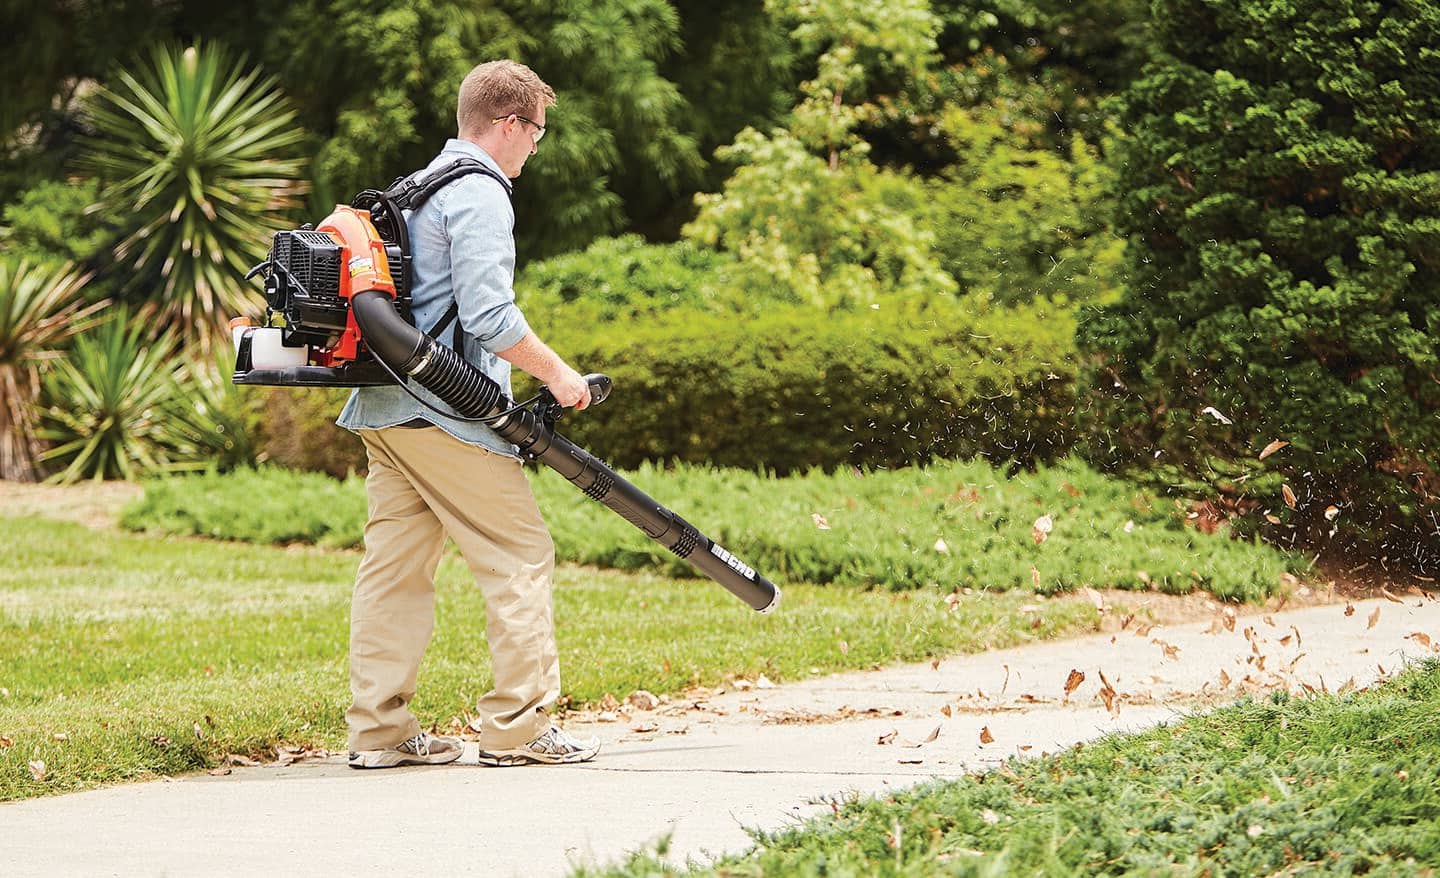 A person uses a backpack-style leaf blower.